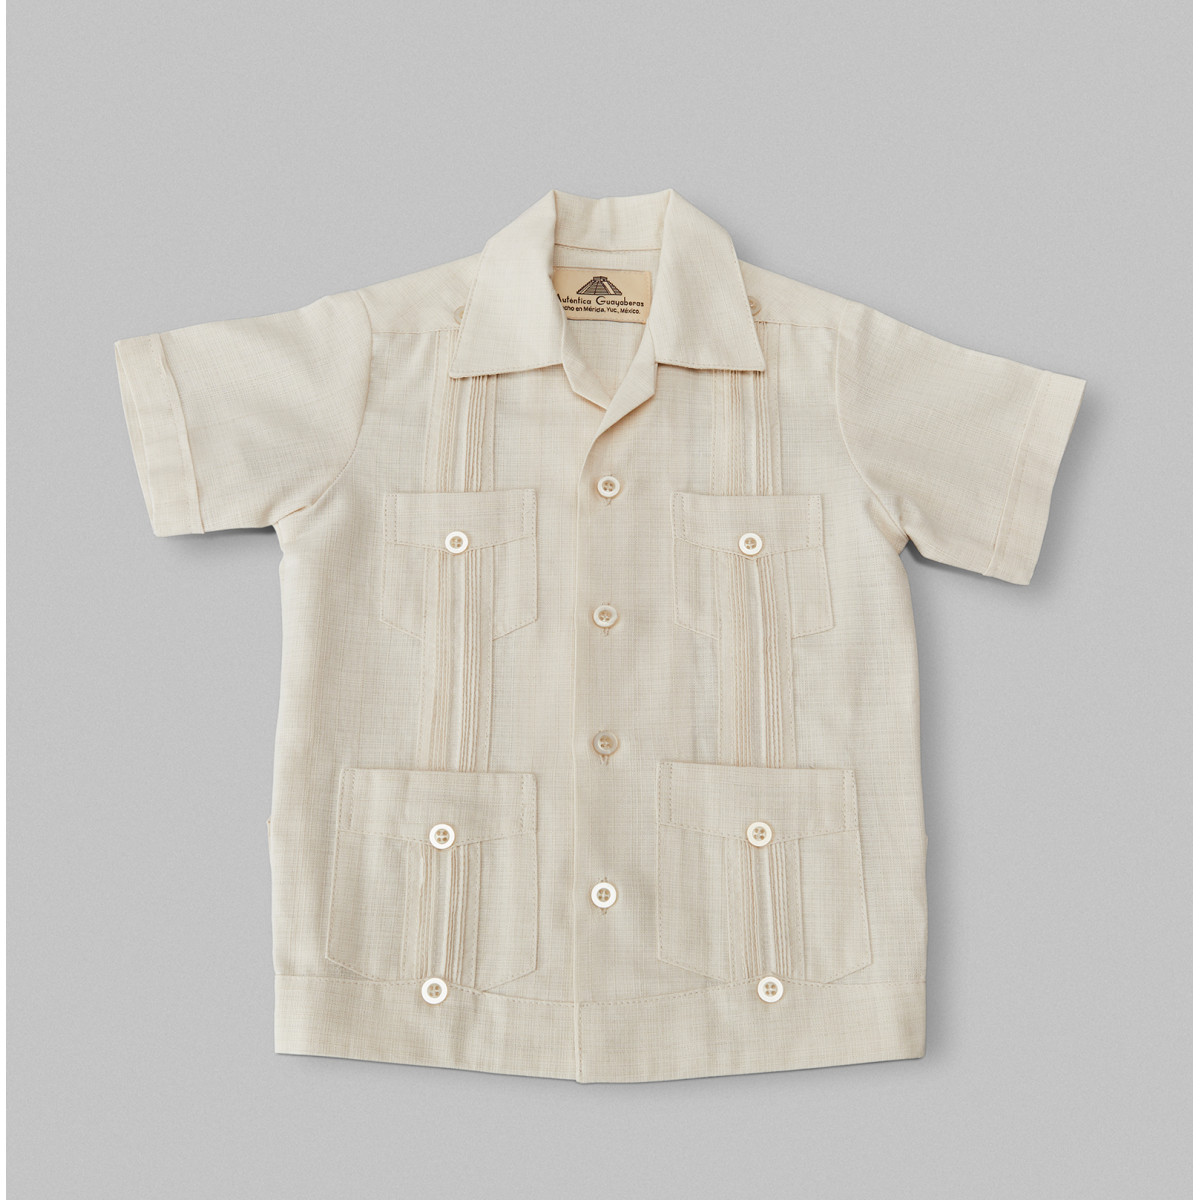 Toddler Guayabera Cream-Colored 60 years reference of the author's craft in Mexico now available online.